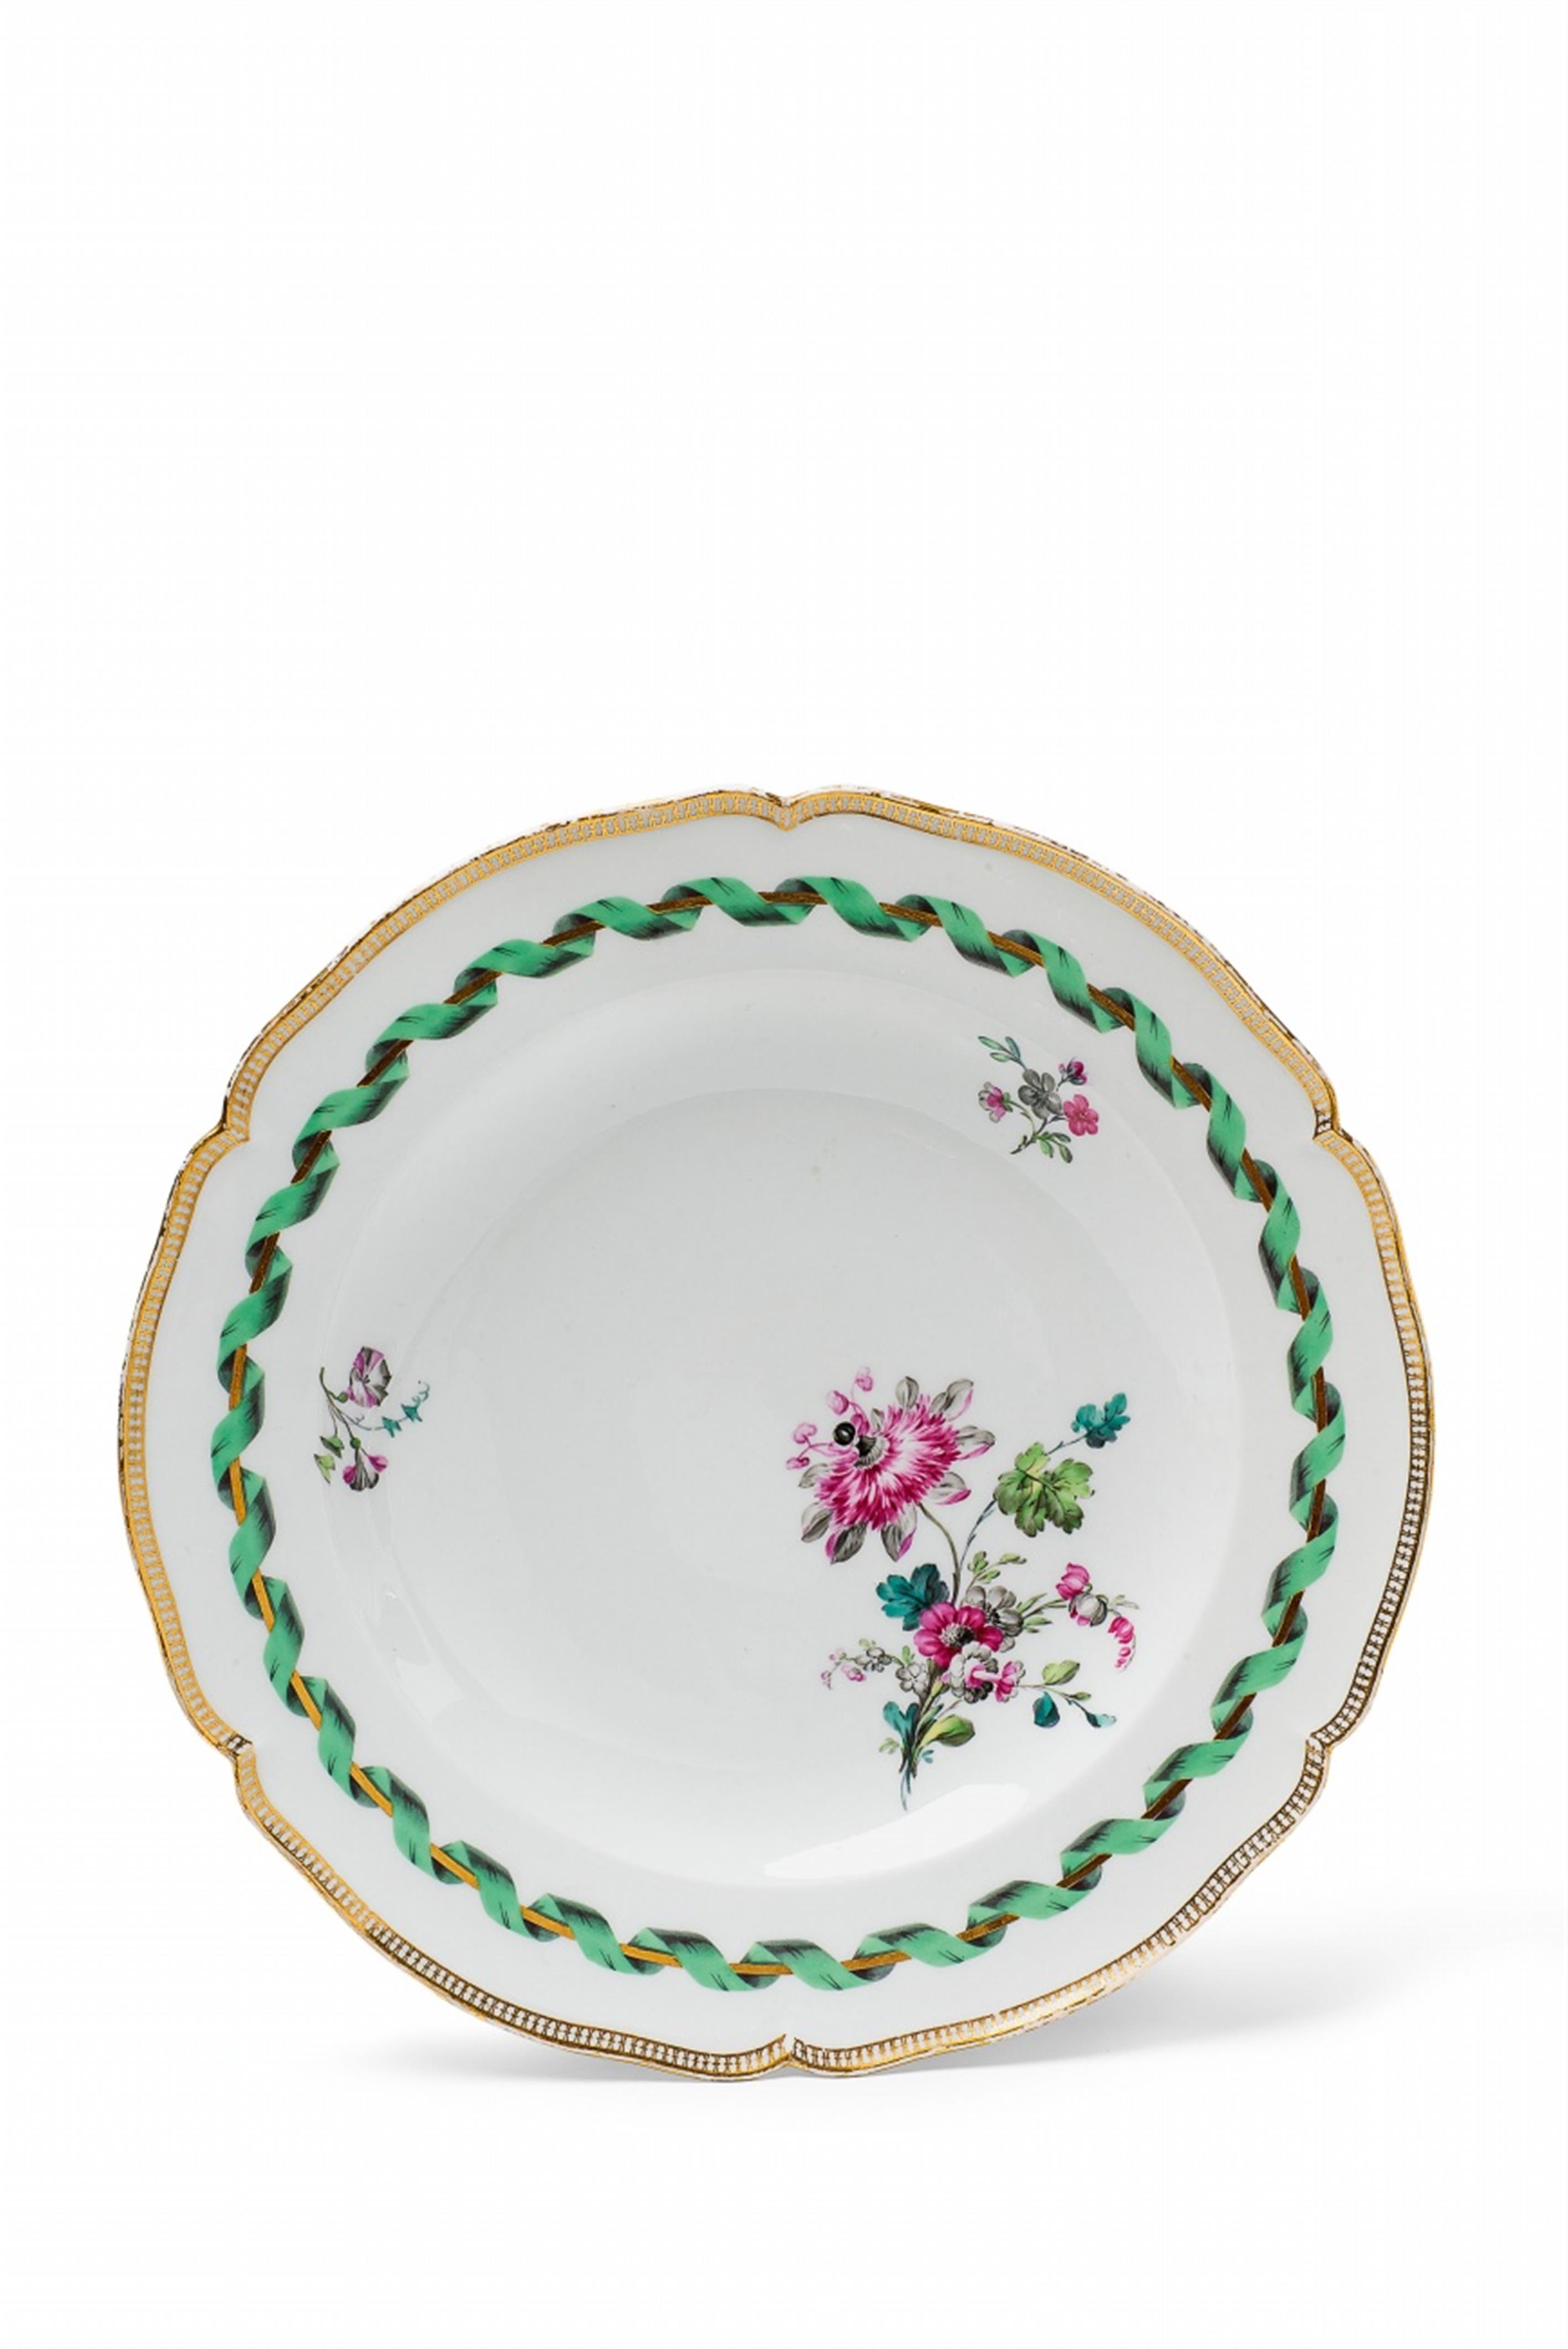 A Berlin KPM porcelain dinner plate with a green ribbon - image-1